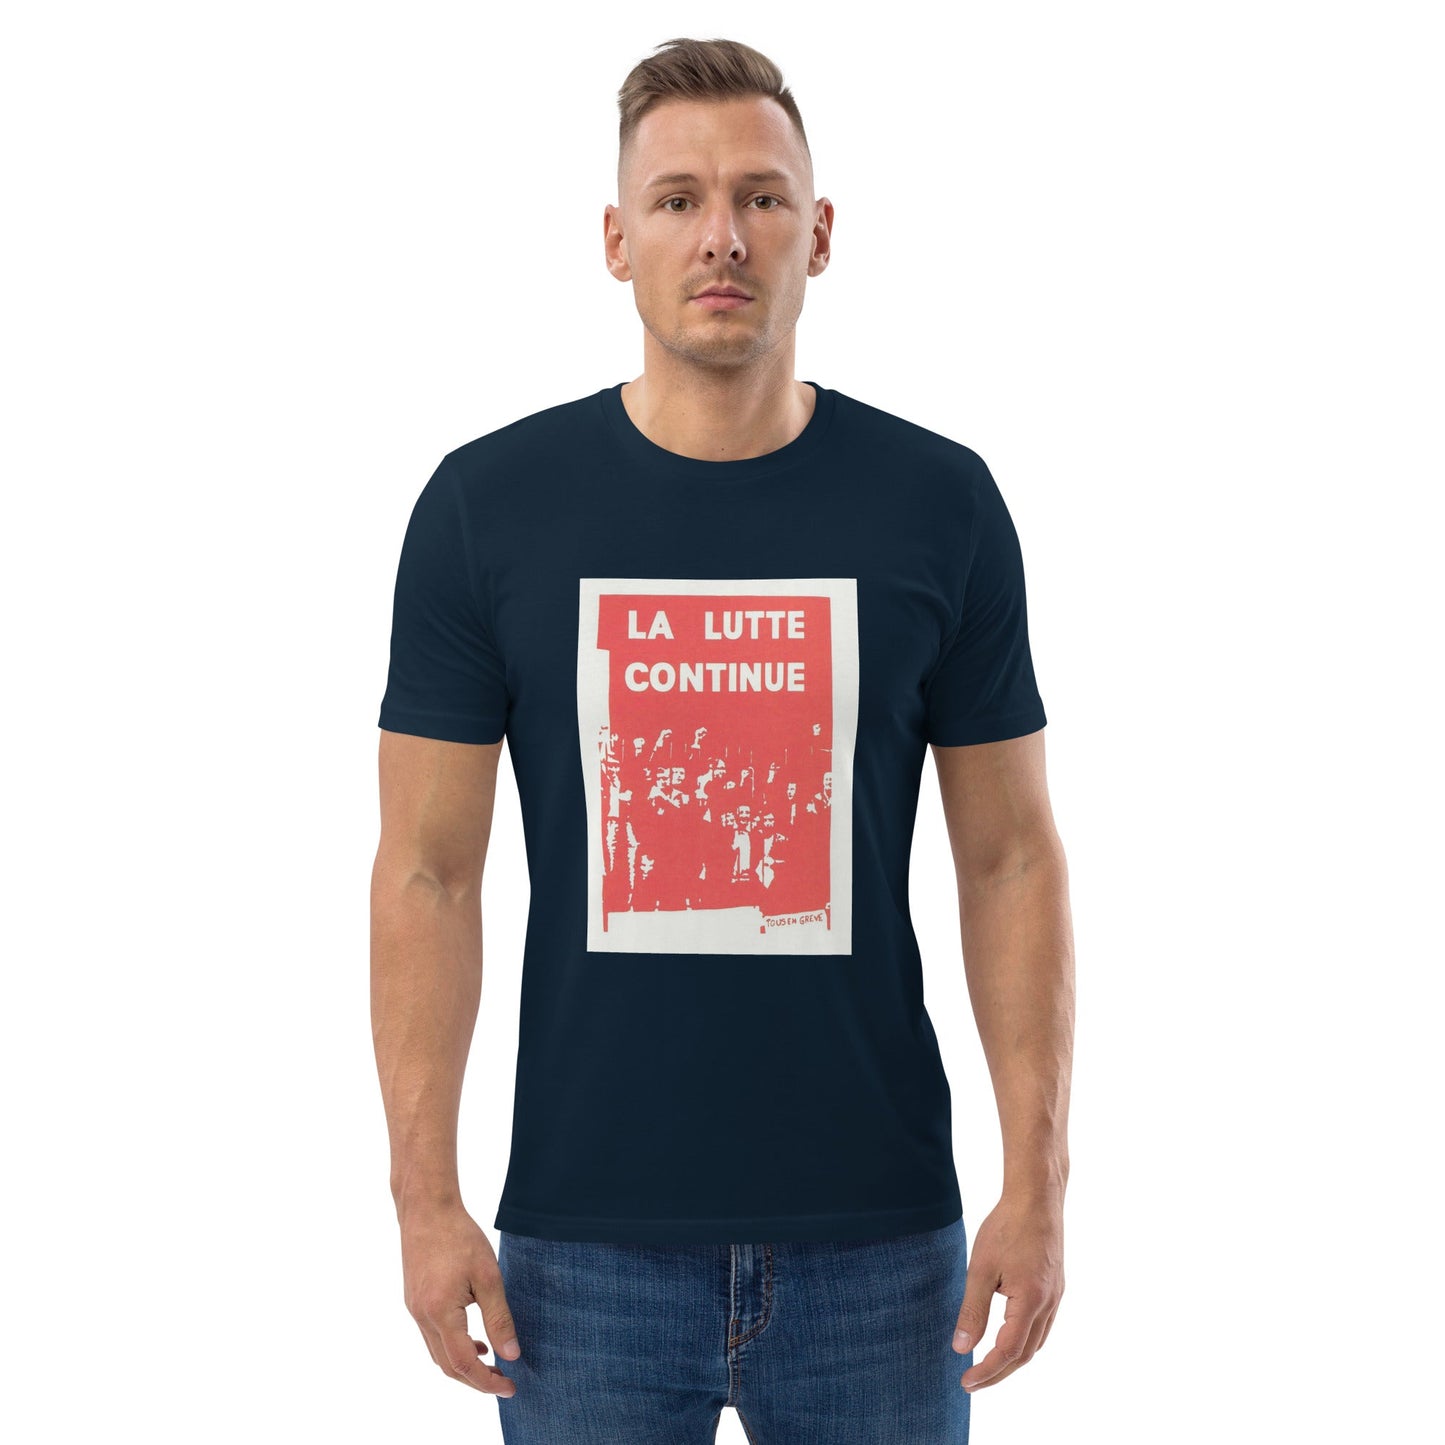 The Struggle Continues - Unisex organic cotton t-shirt - Souled Out World